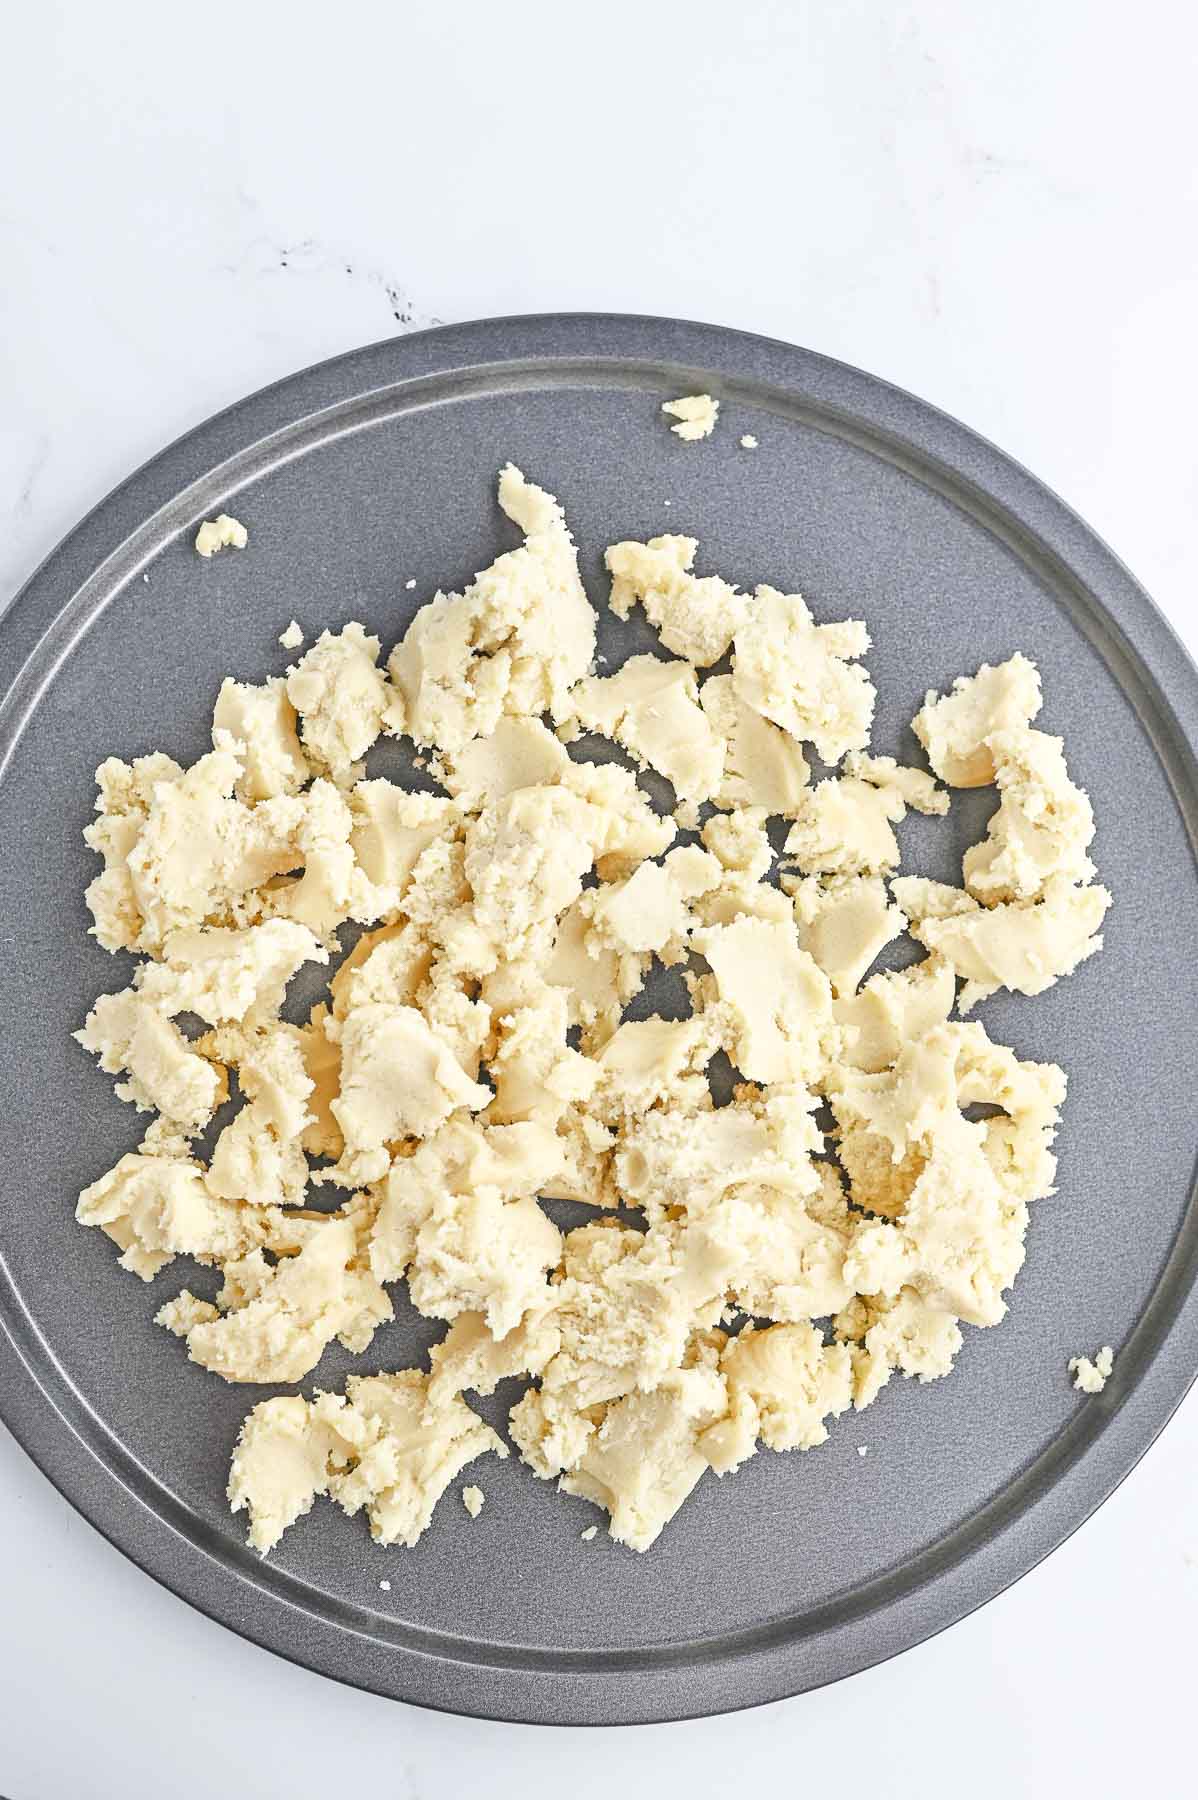 Sugar cookie dough crumbled over pizza pan.